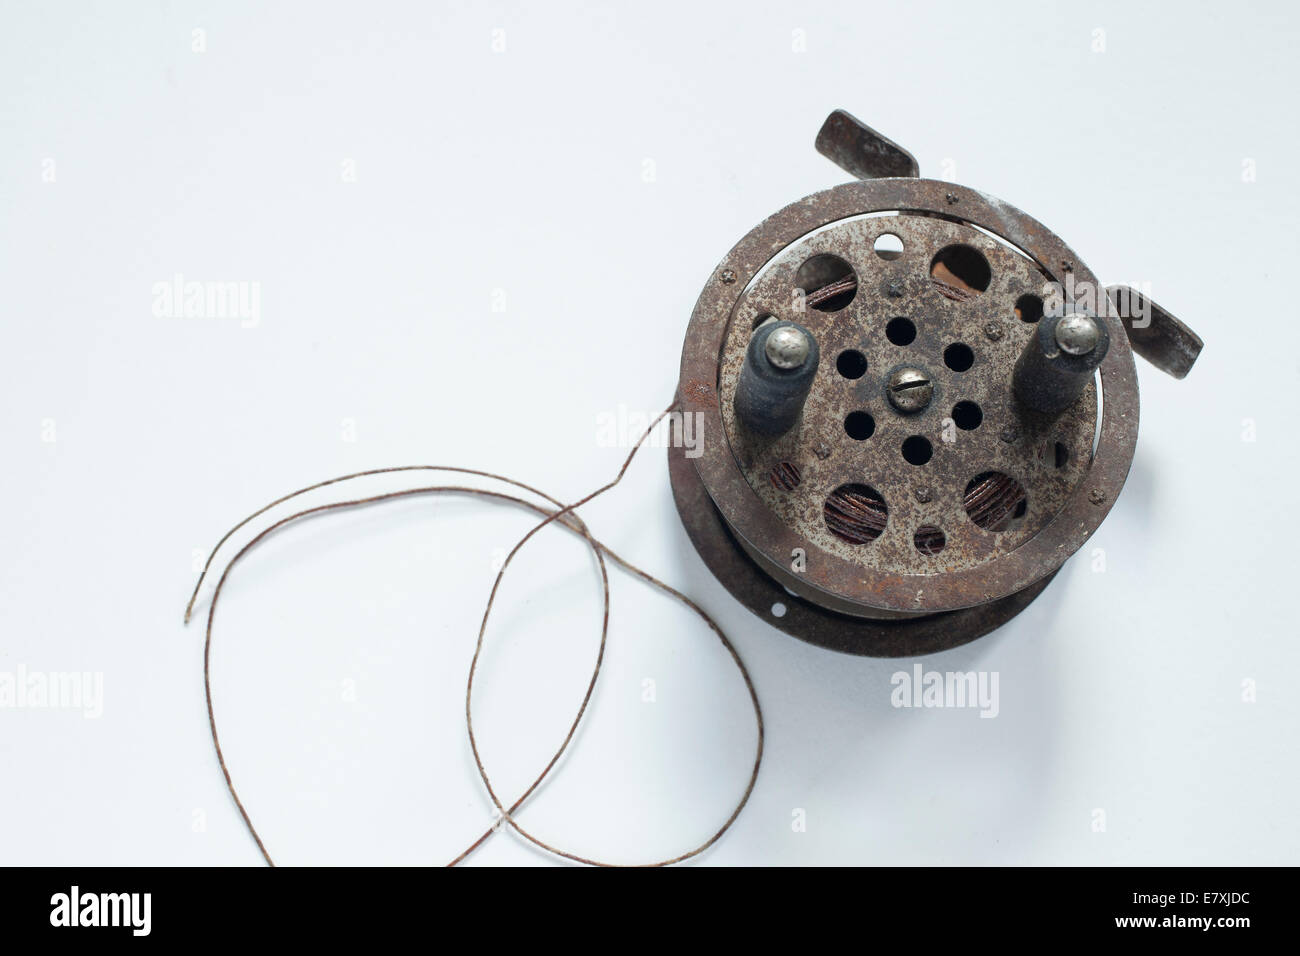 Antique fly fishing reel with line. Stock Photo